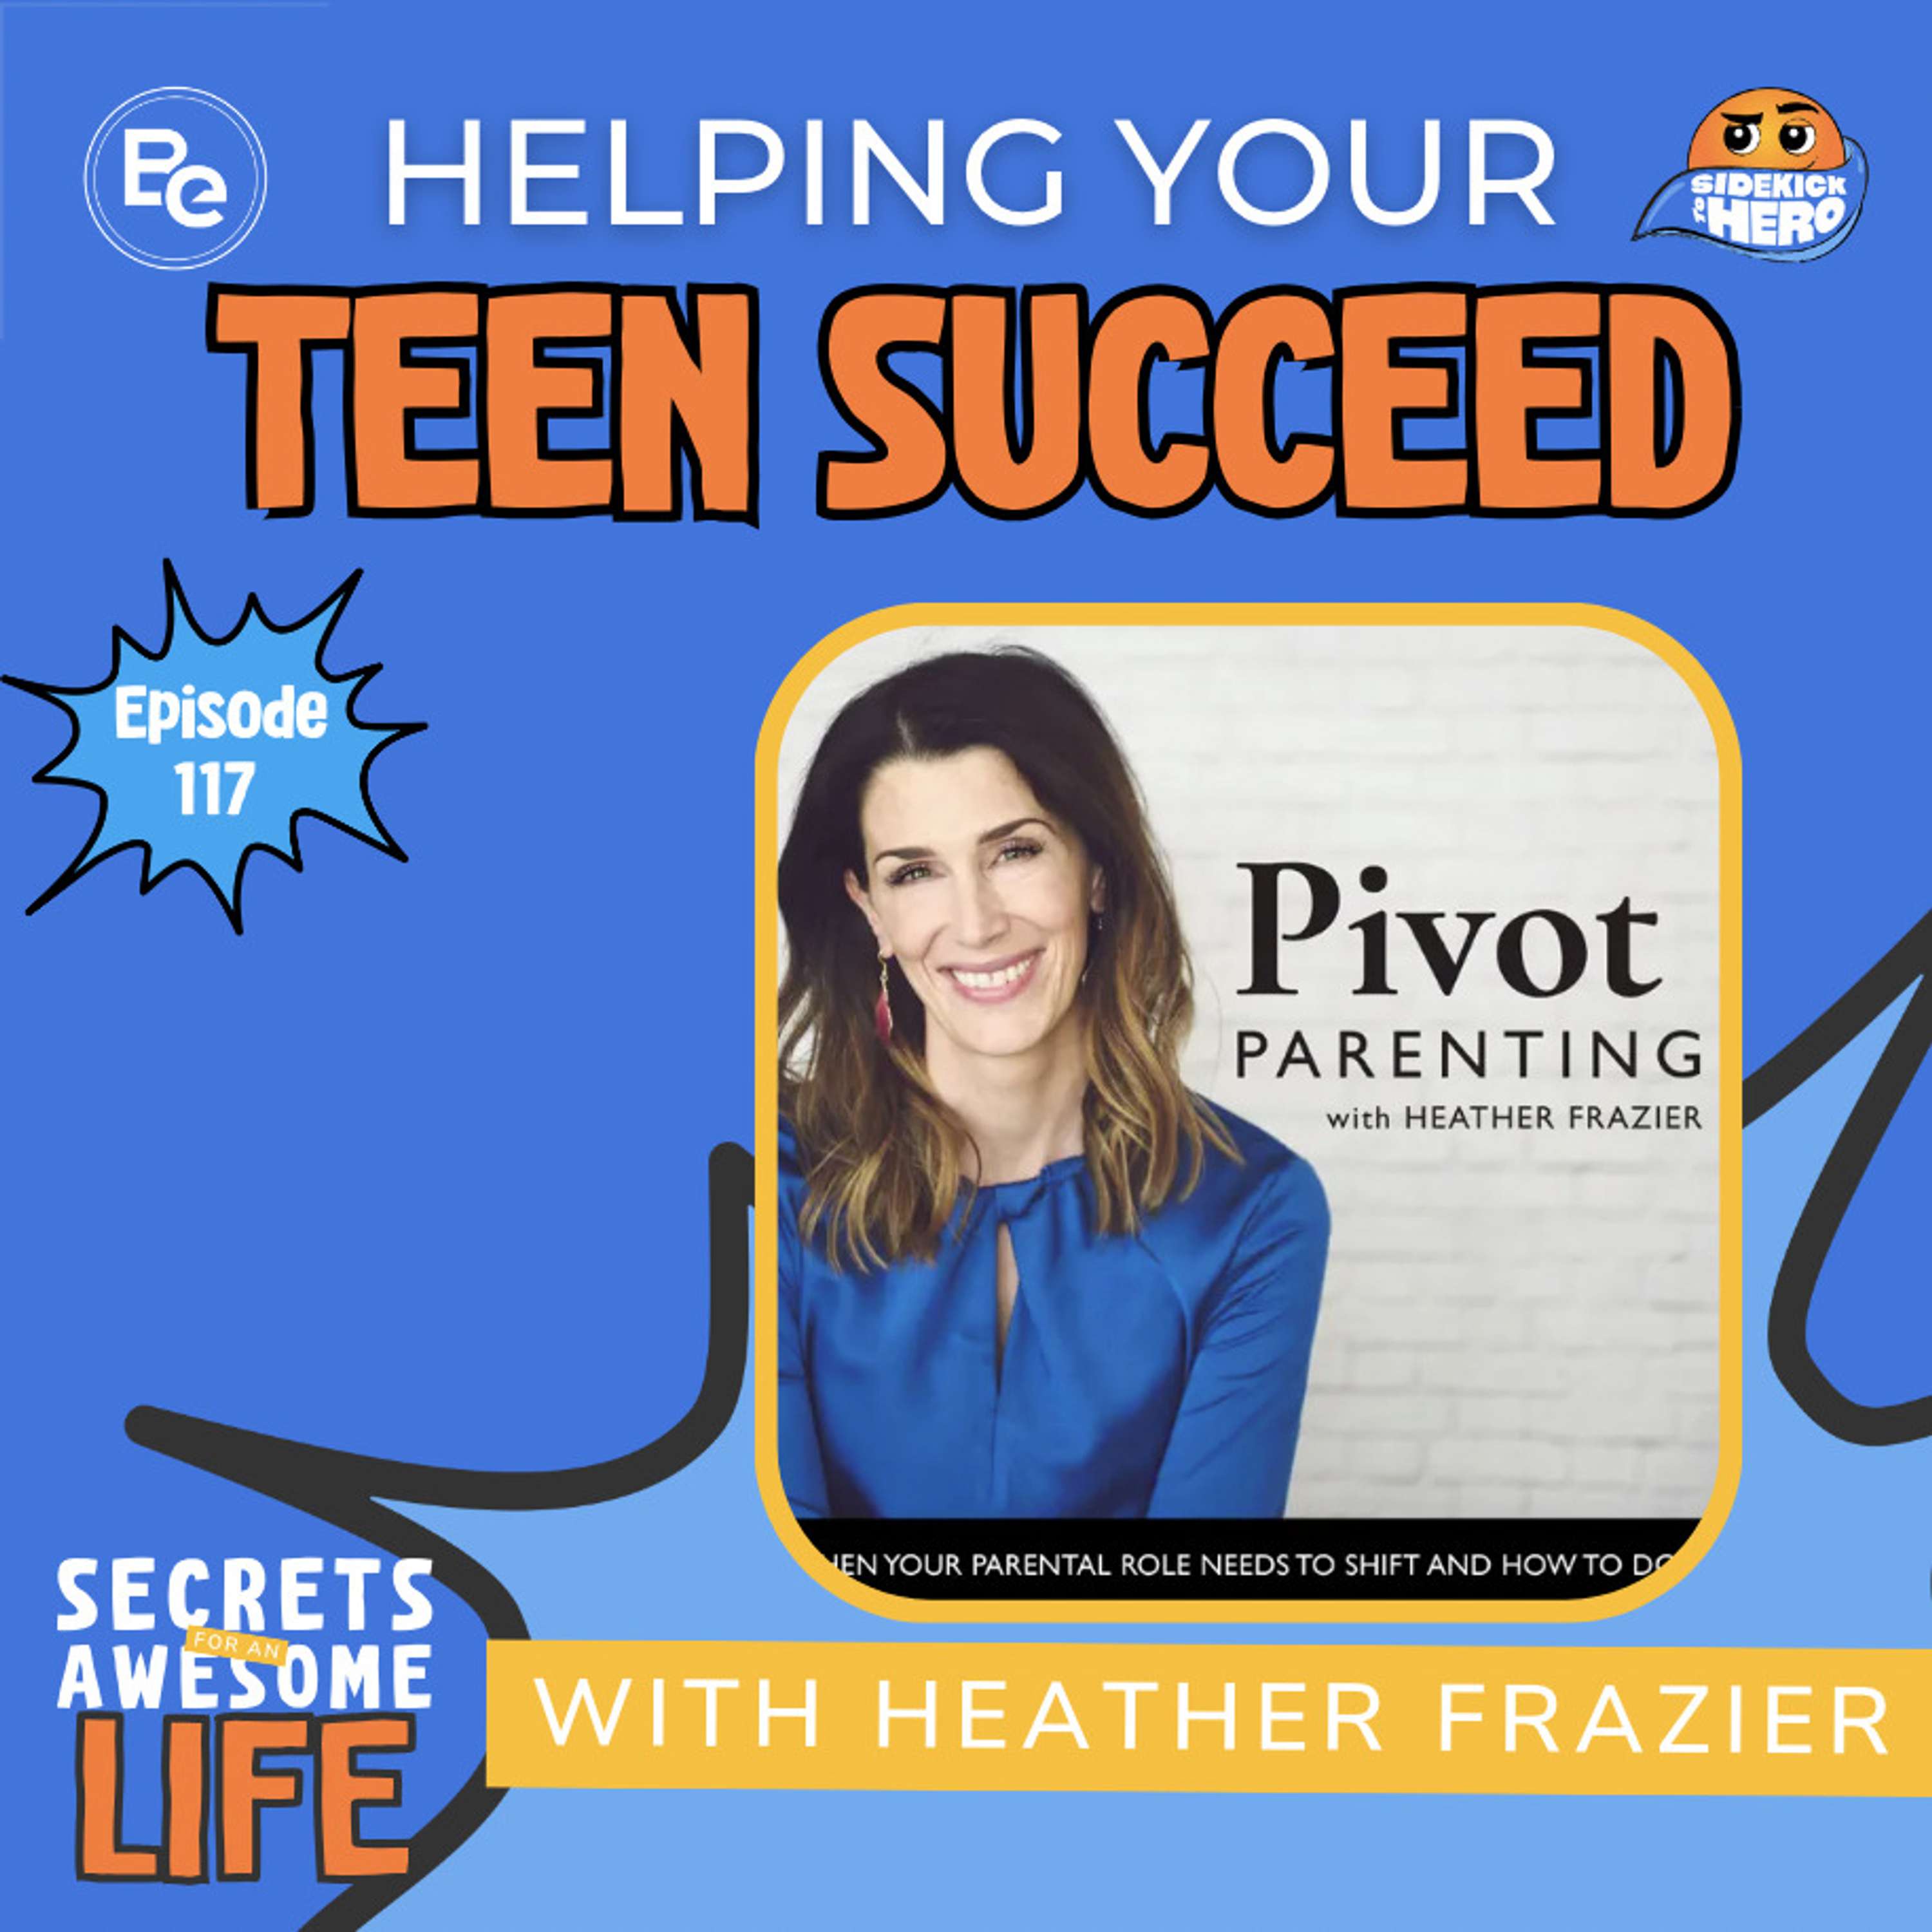 Helping Your Teen Succeed, Interview with Heather Frazier